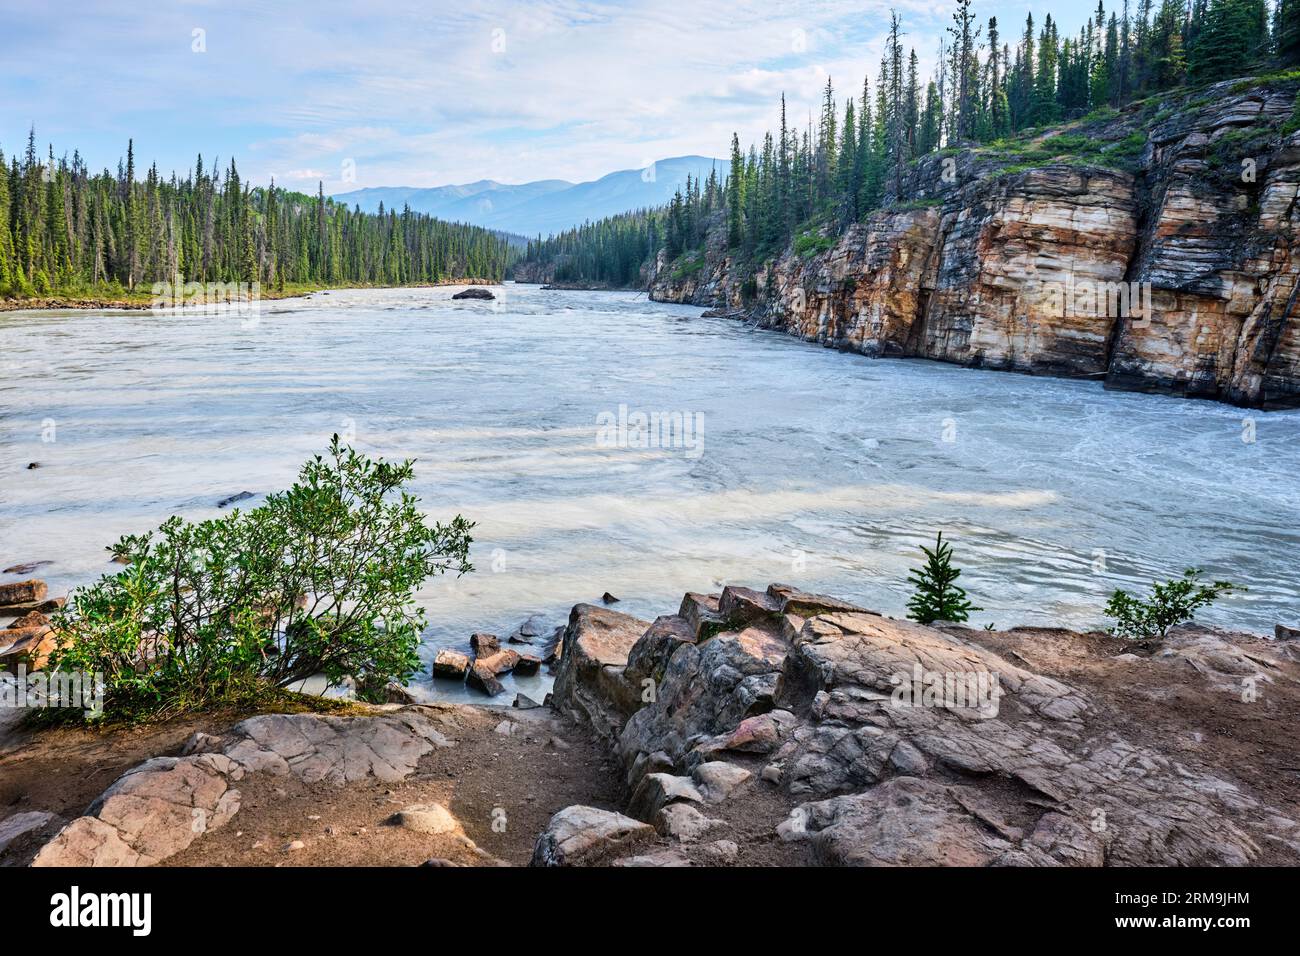 The Athabaska River as it flows away from the base of the waterfall in Jasper National Park. Stock Photo